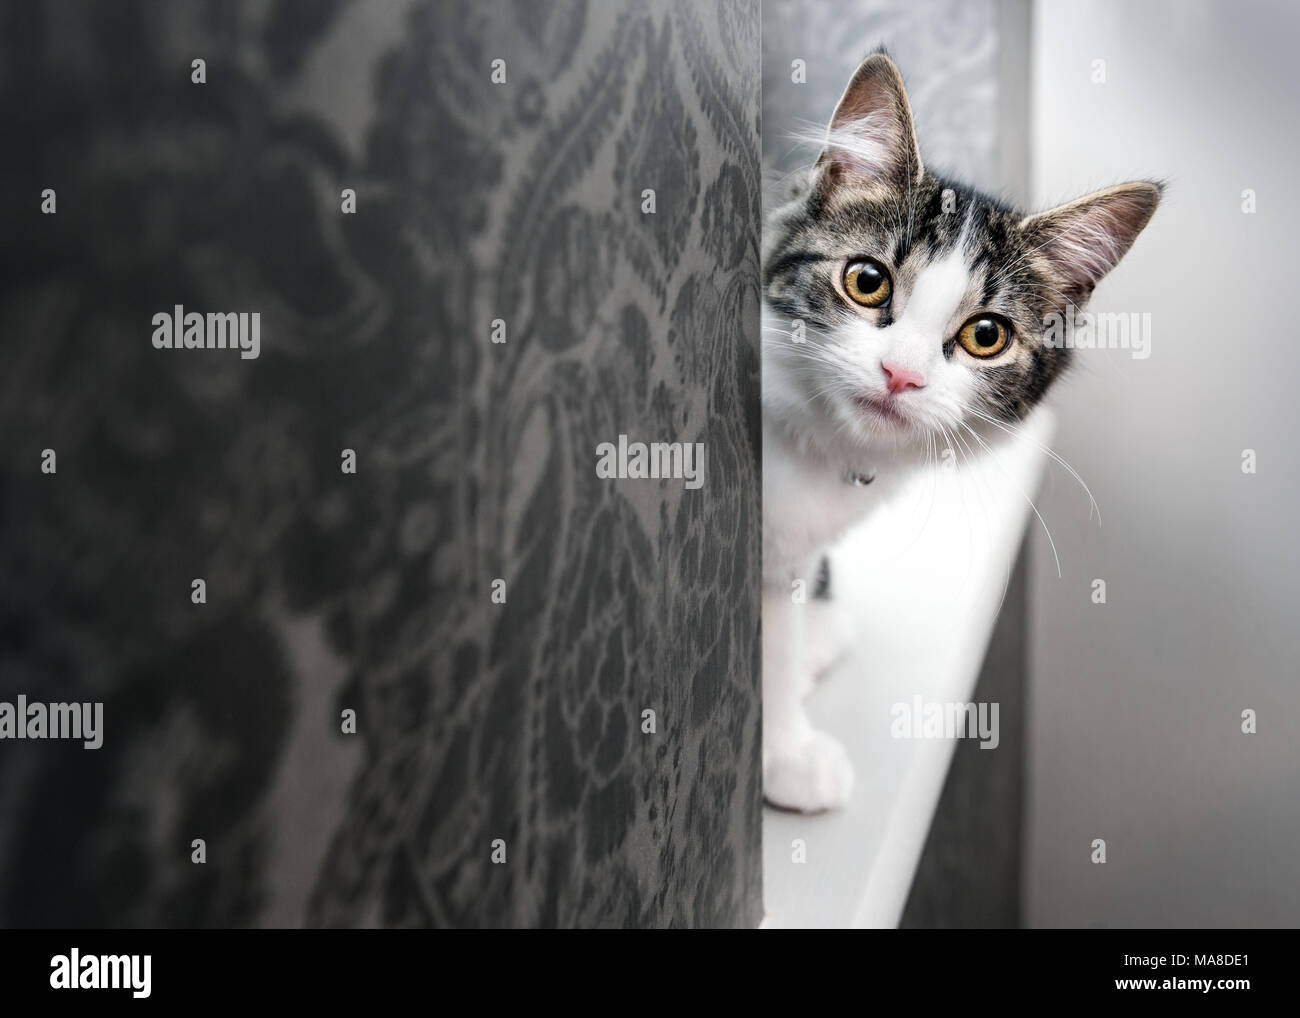 Curious young kitten on a windowsill looking directly at camera Stock Photo